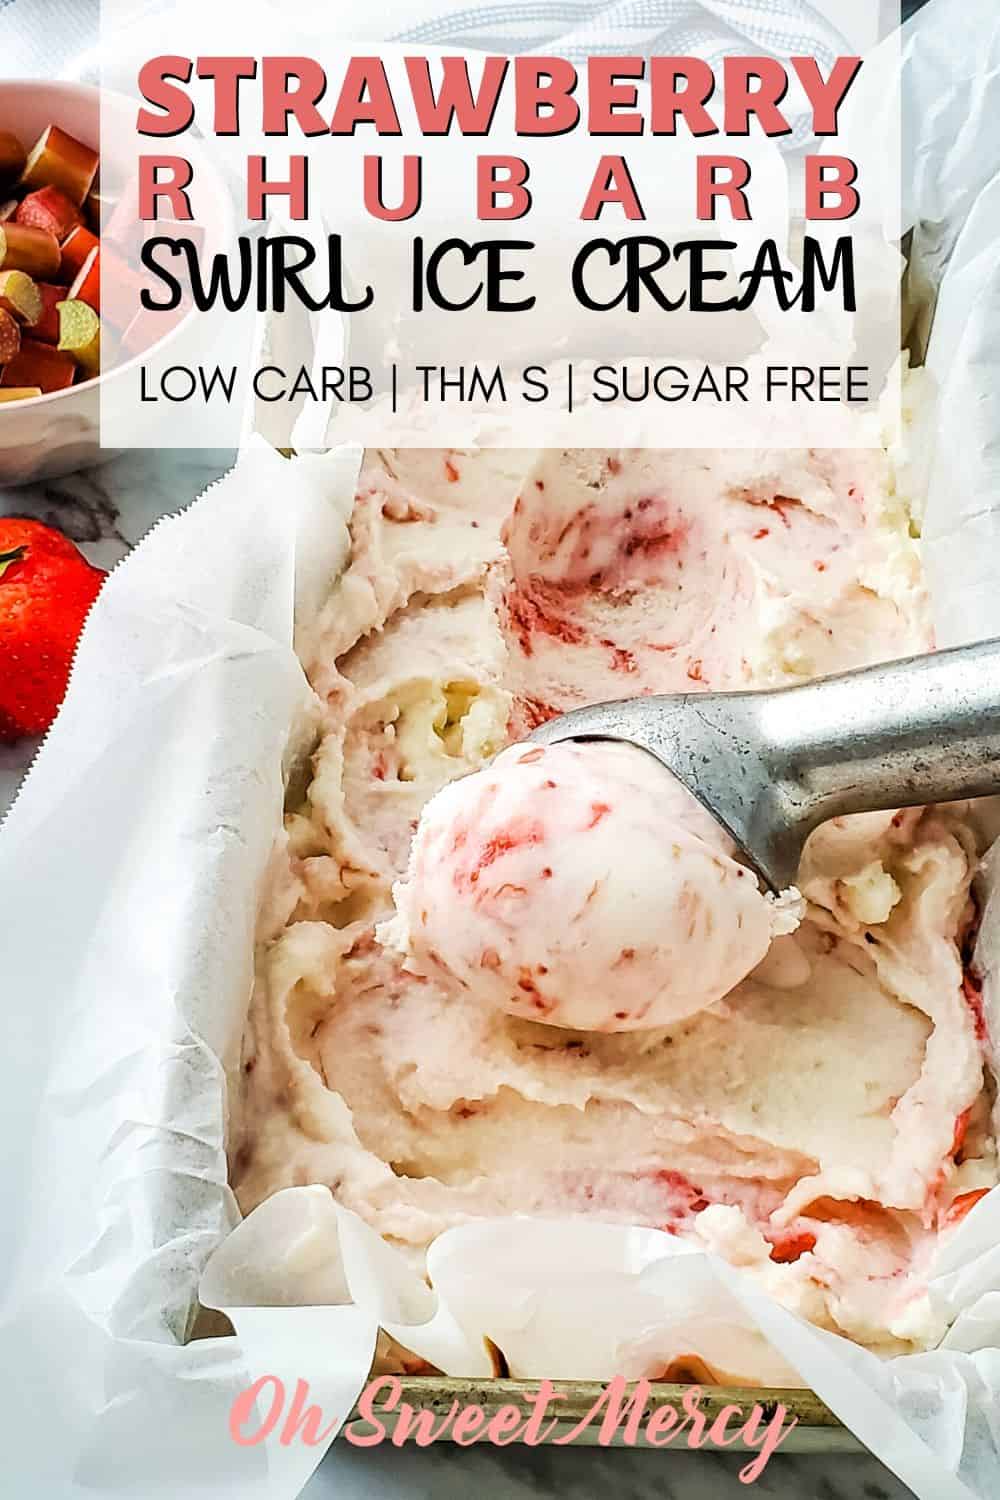 Love Rhubarb? Make my Low Carb Strawberry Rhubarb Swirl Ice Cream! It's the perfect pairing of sweet, tart, and tangy strawberry rhubarb sauce and rich, creamy vanilla ice cream. Made without sugar, each serving has under 2 grams of net carbs. A perfect summer treat! #lowcarb #thm #sugarfree #rhubarb #icecream #thmdesserts #keto